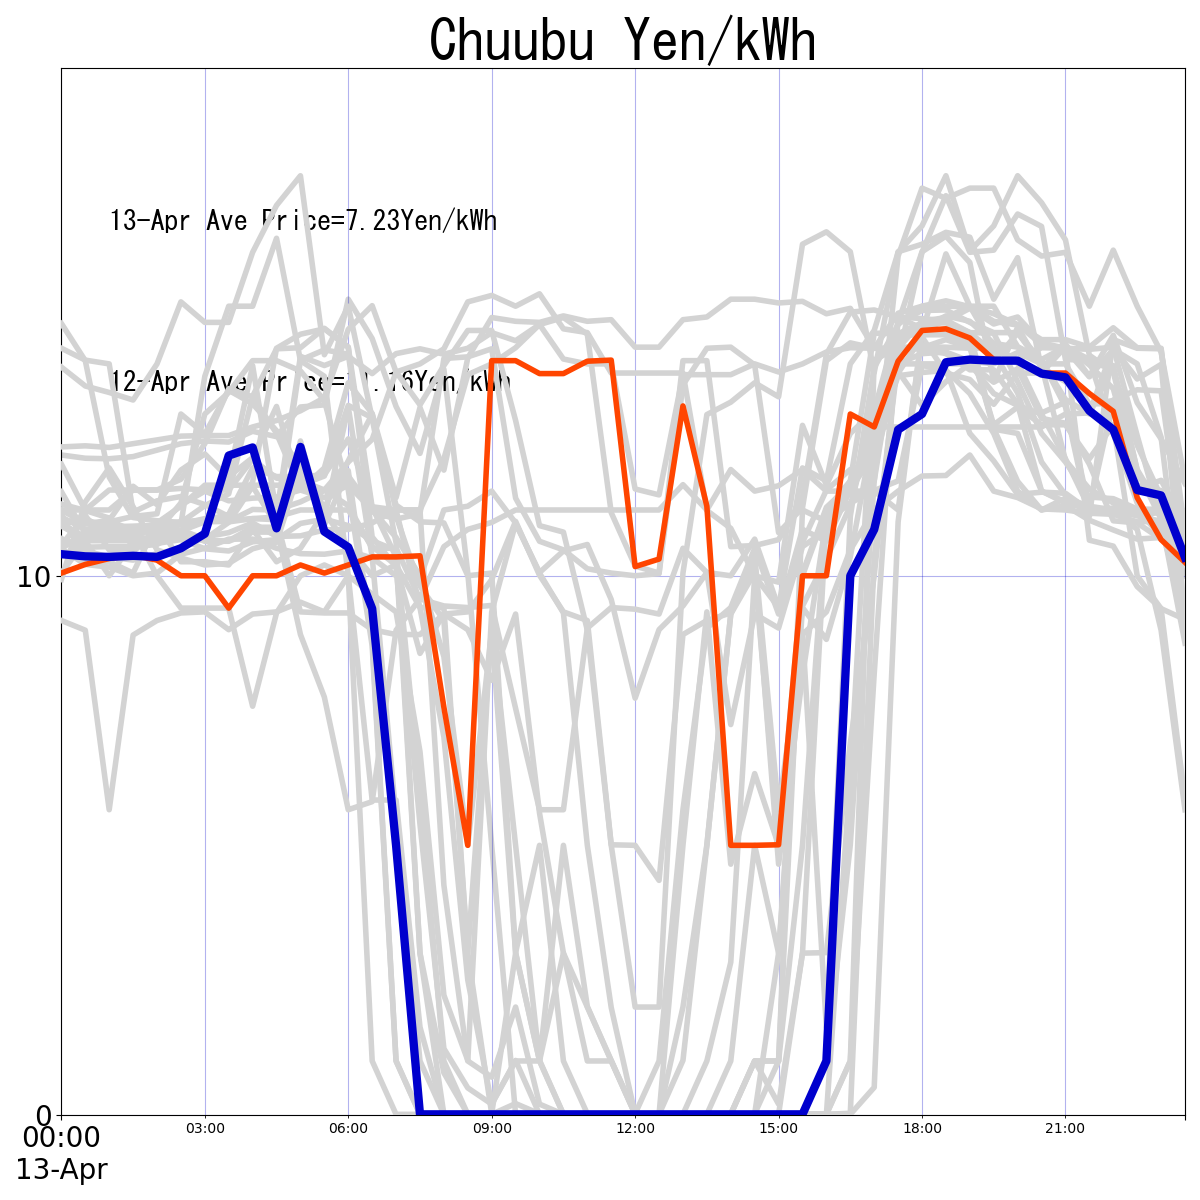 Japanese Electricity JEPX Chuubu Area Price plotted by time period over the last 30 days.